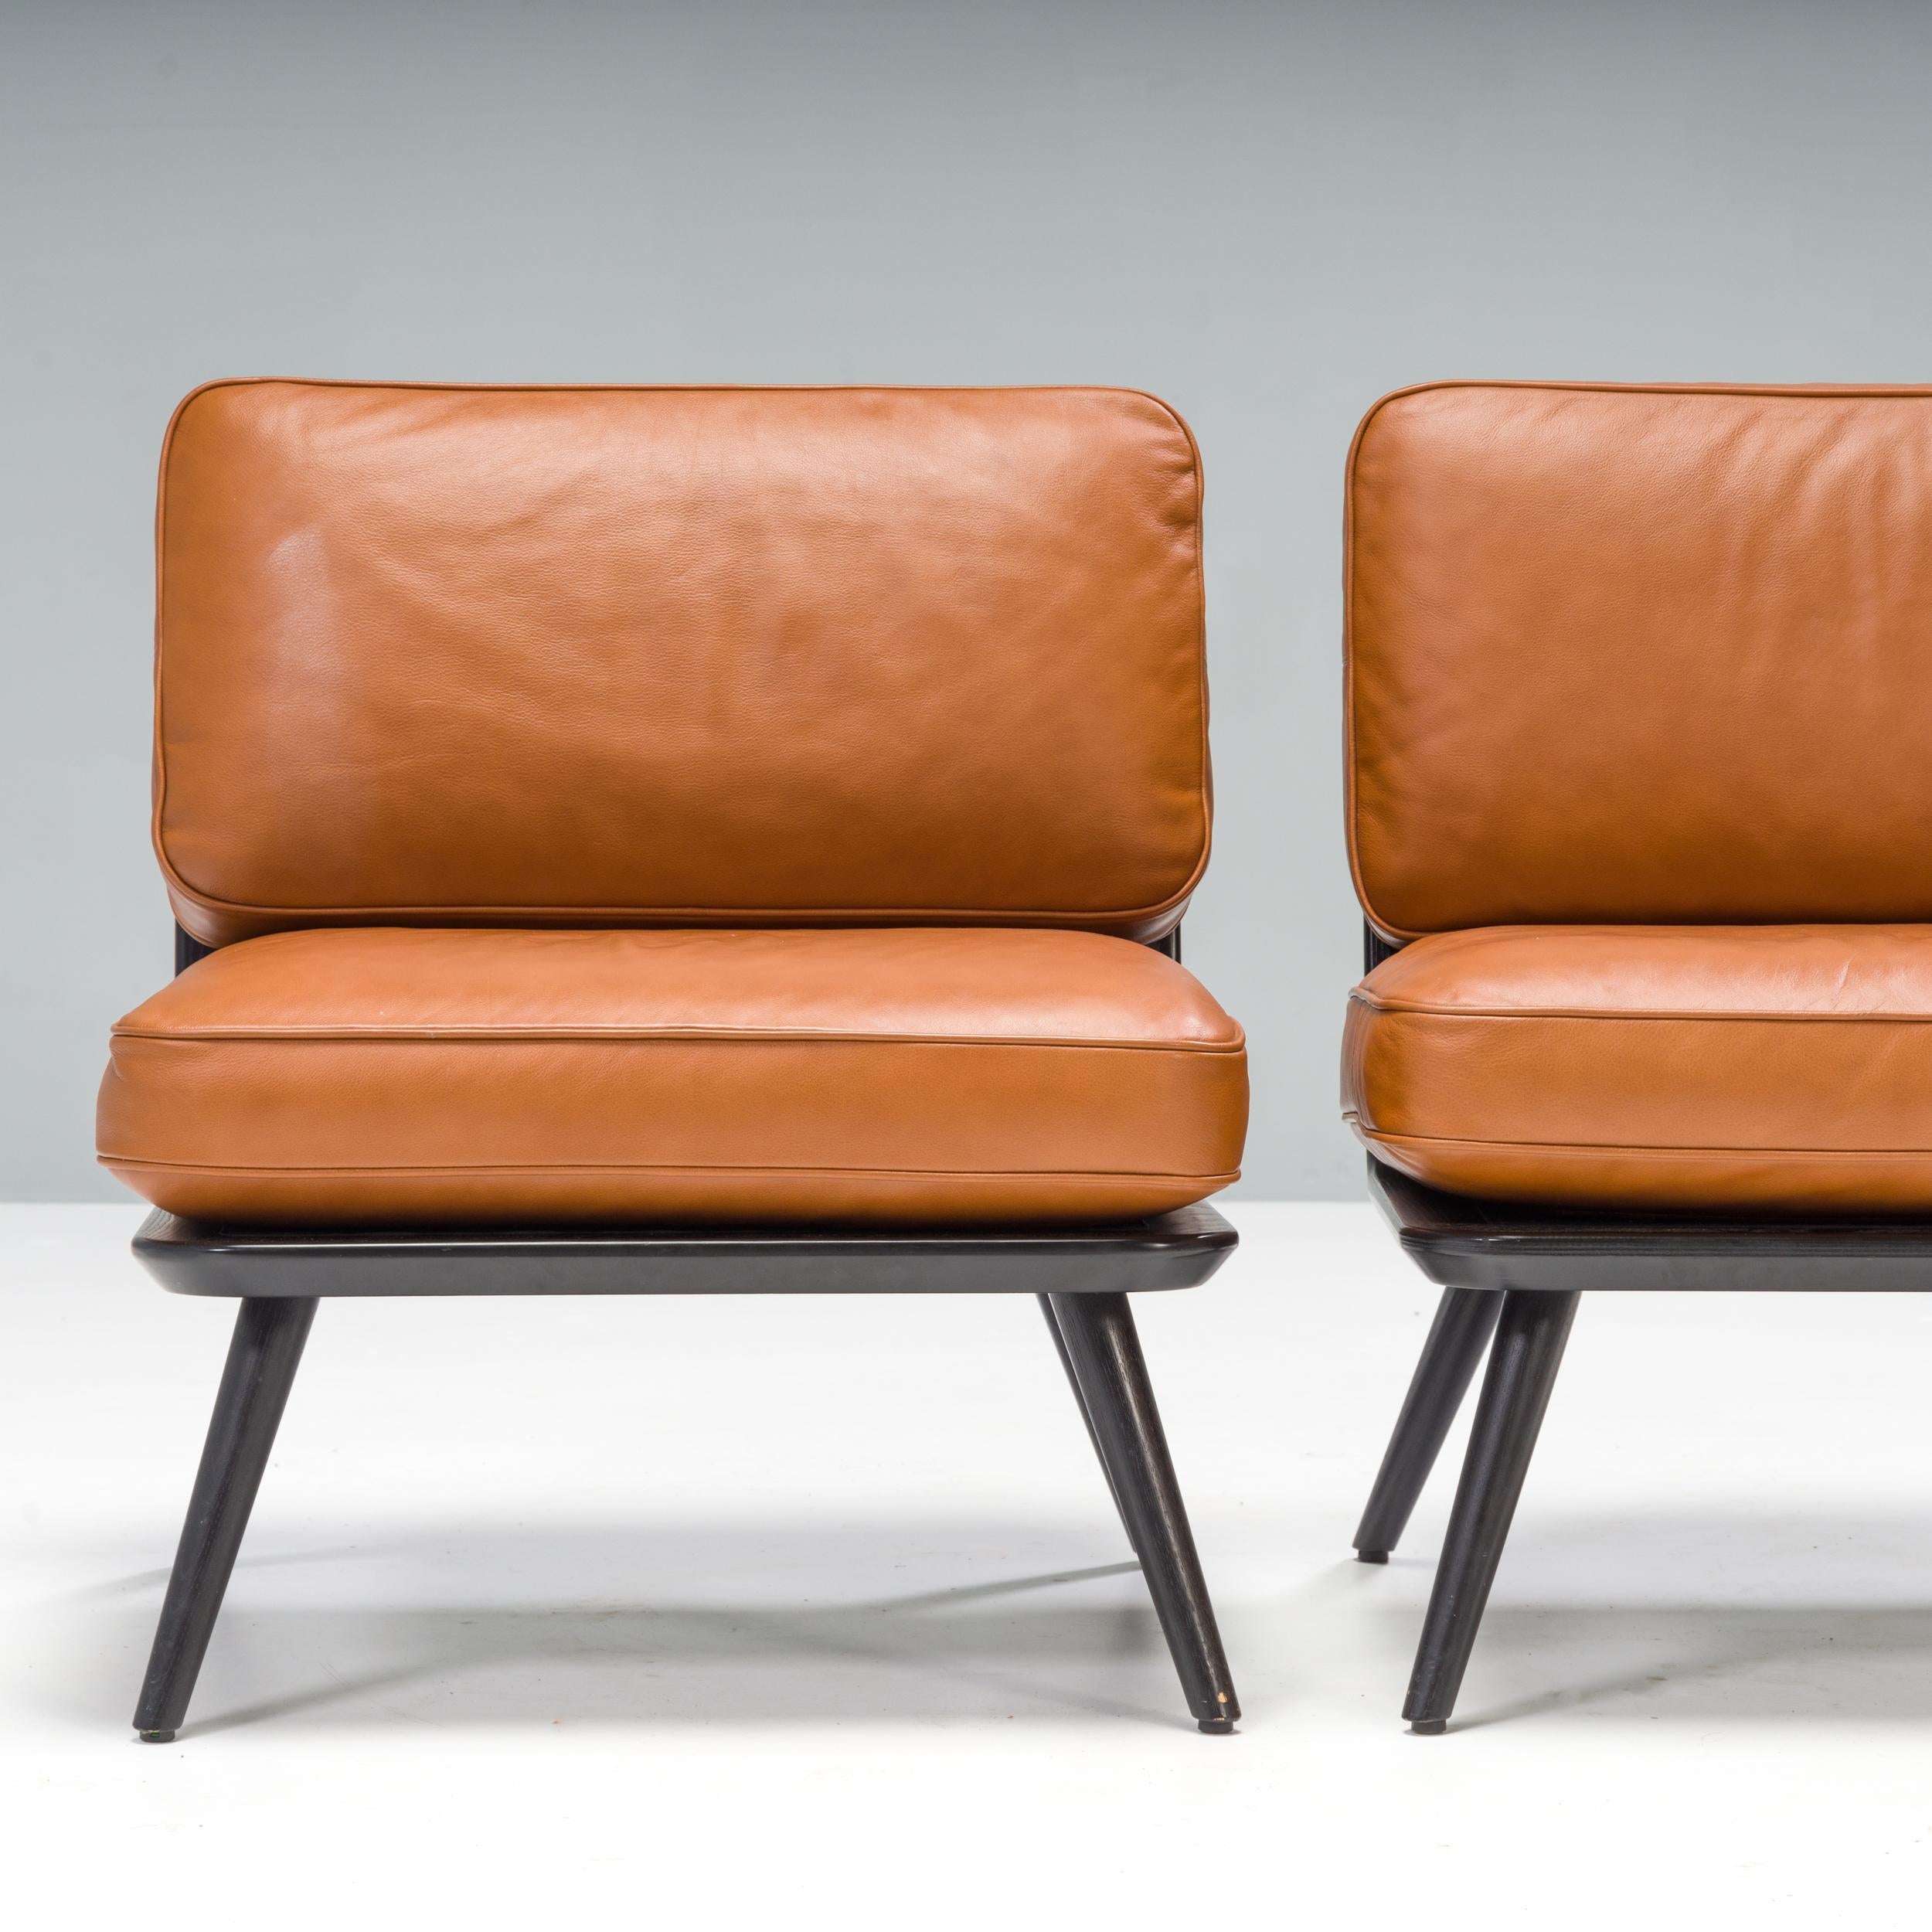 Fredericia by Space Copenhagen Tan Leather Spine Lounge Chair 8